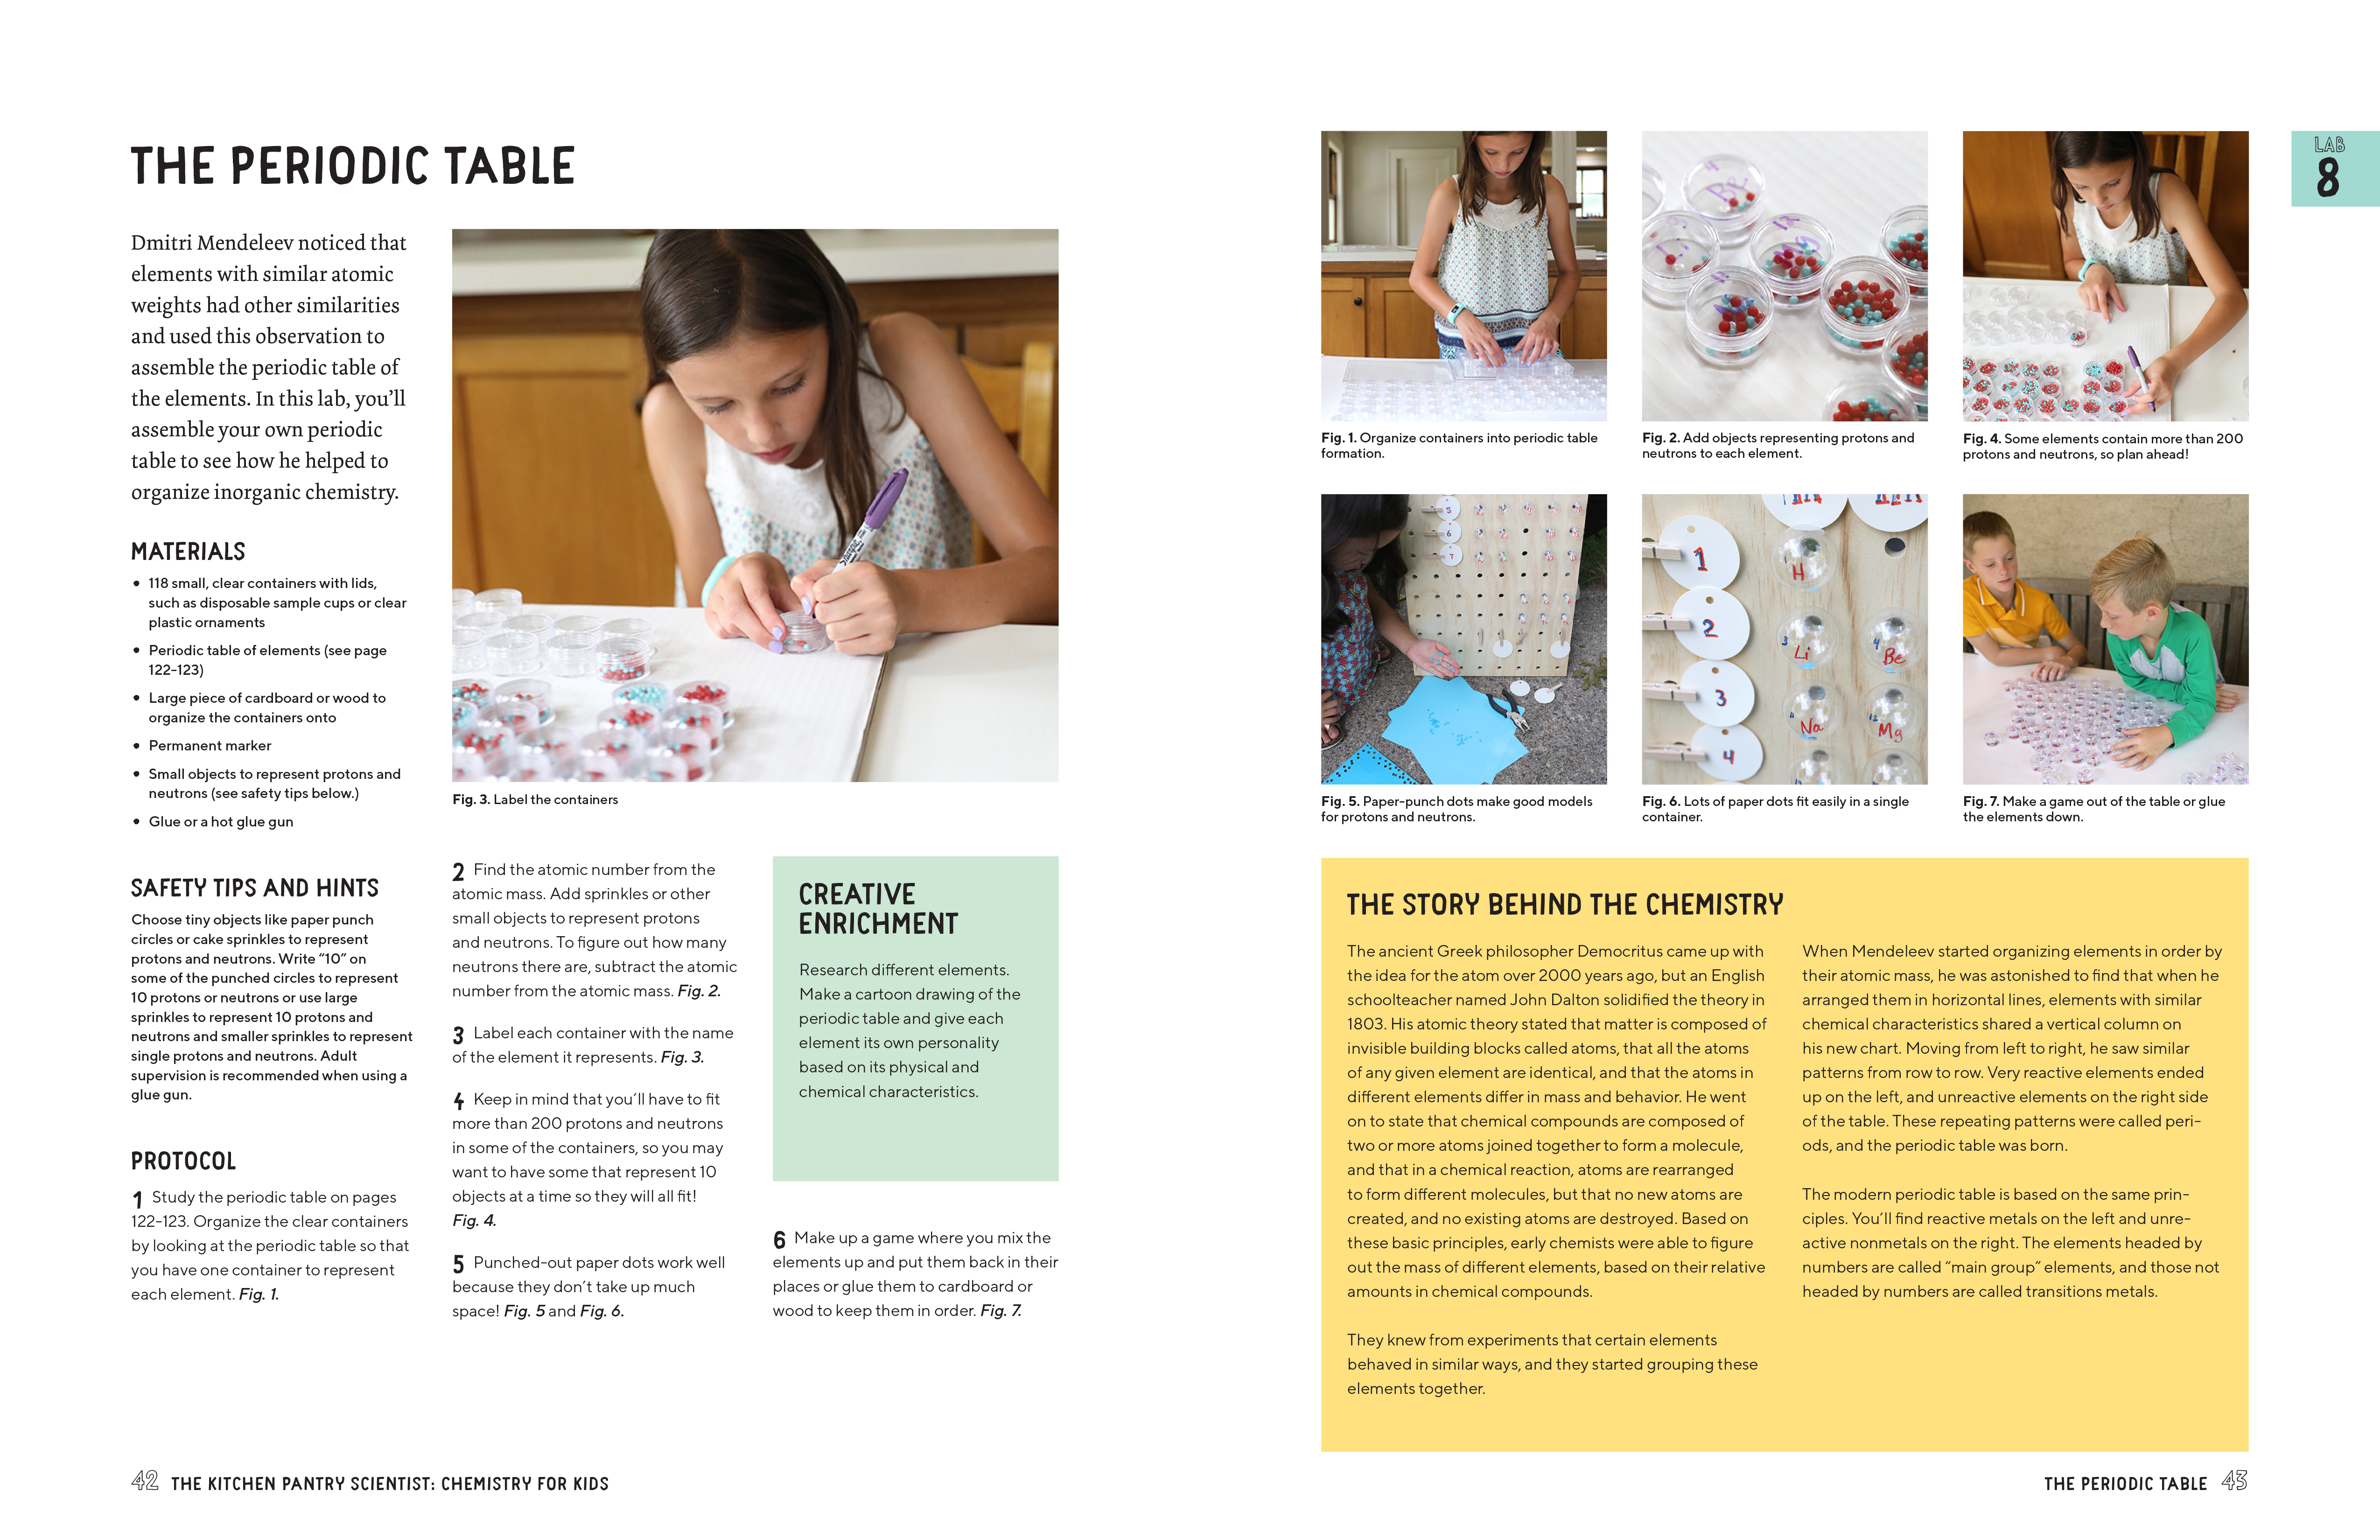 The Kitchen Pantry Scientist Chemistry for Kids